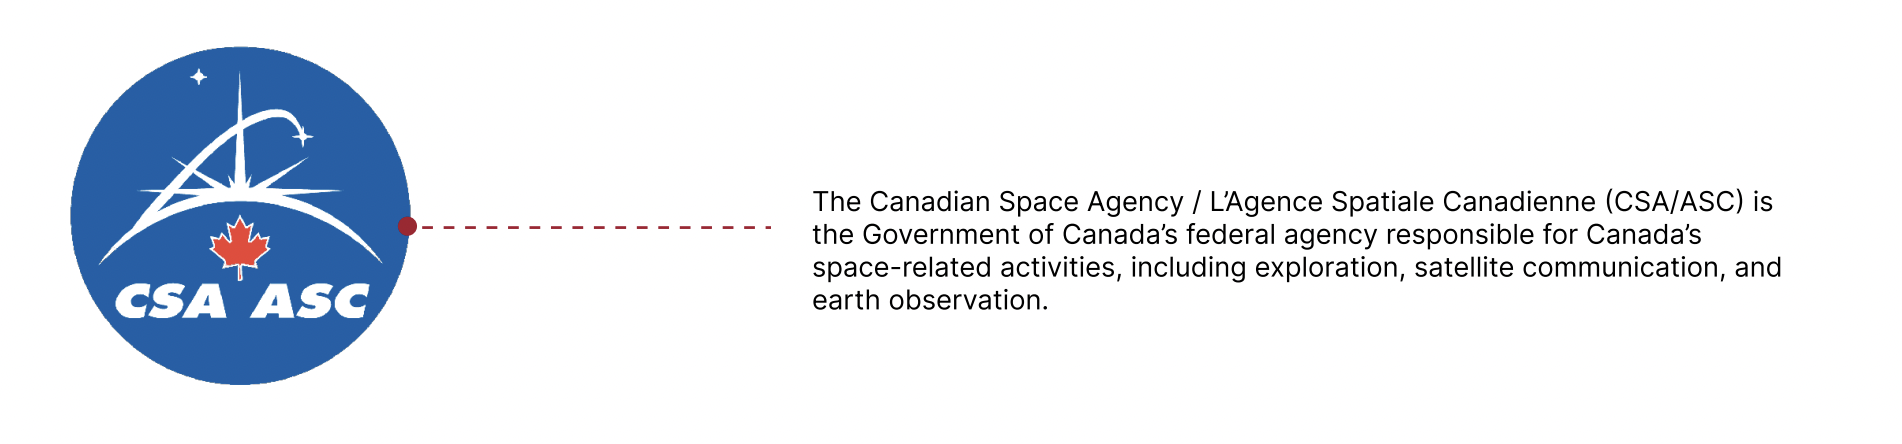 Description of the Canadian Space Agency and logo